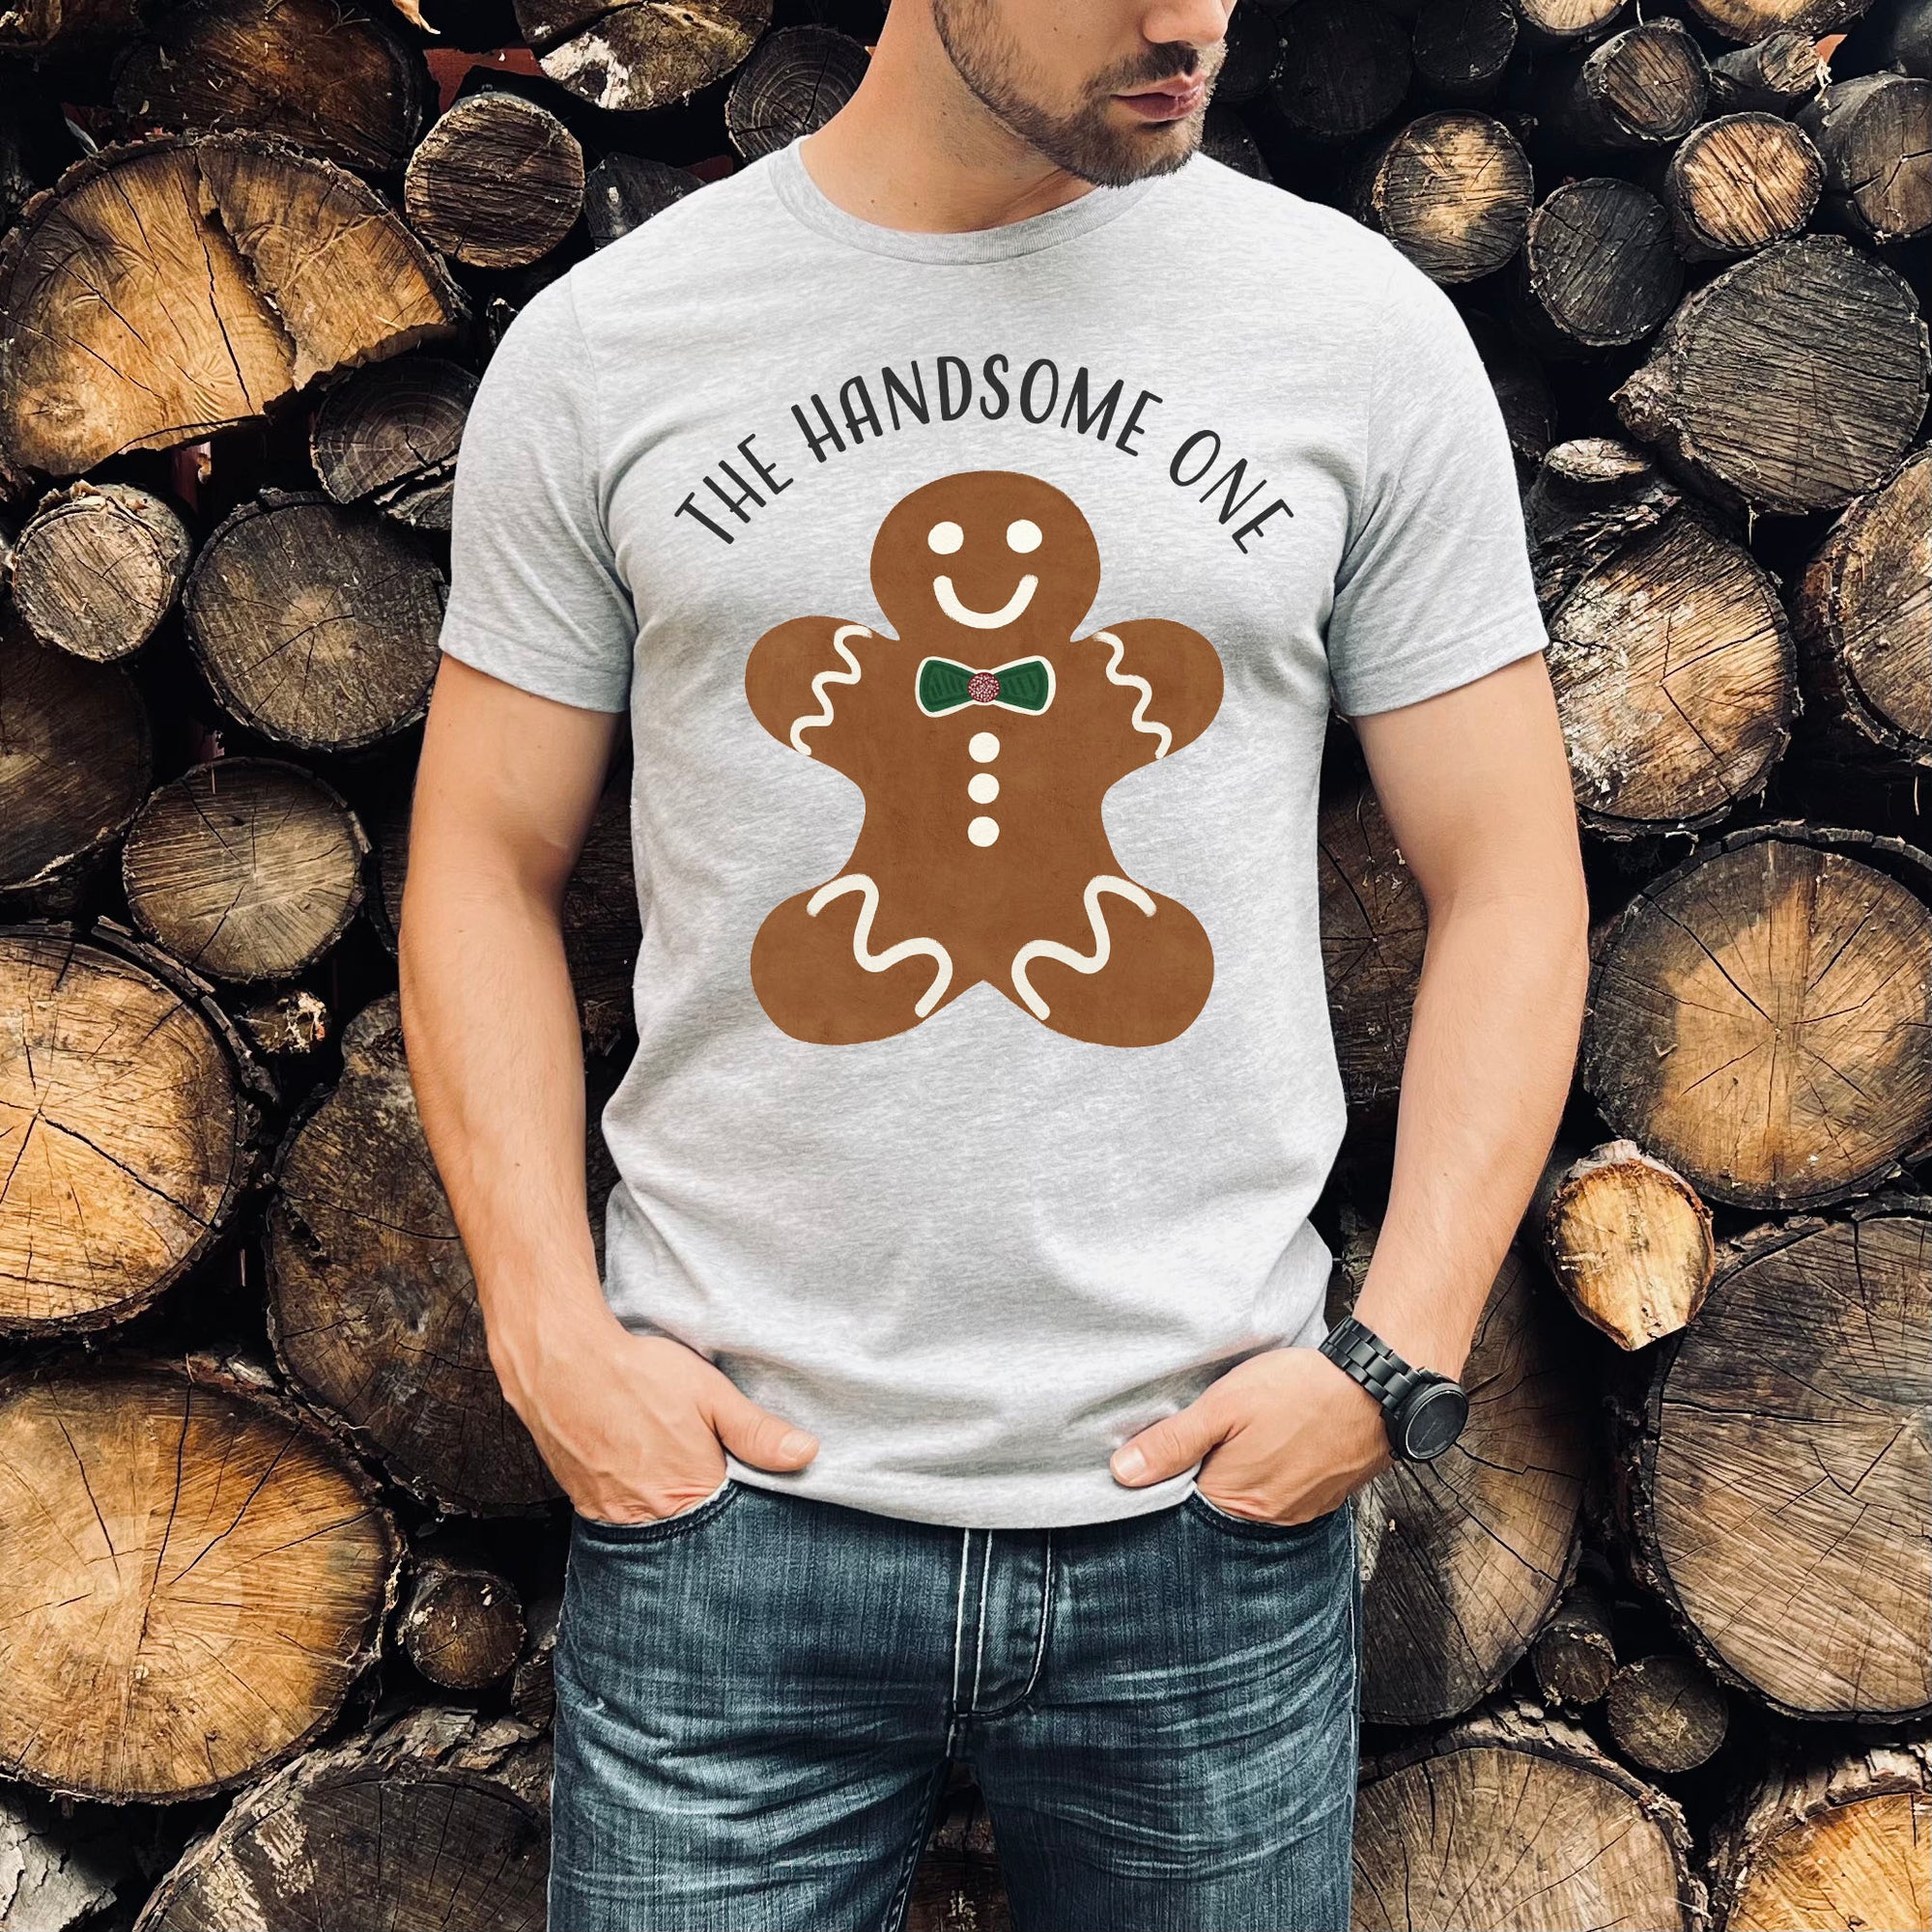 The Handsome One Gingerbread Man Shirt